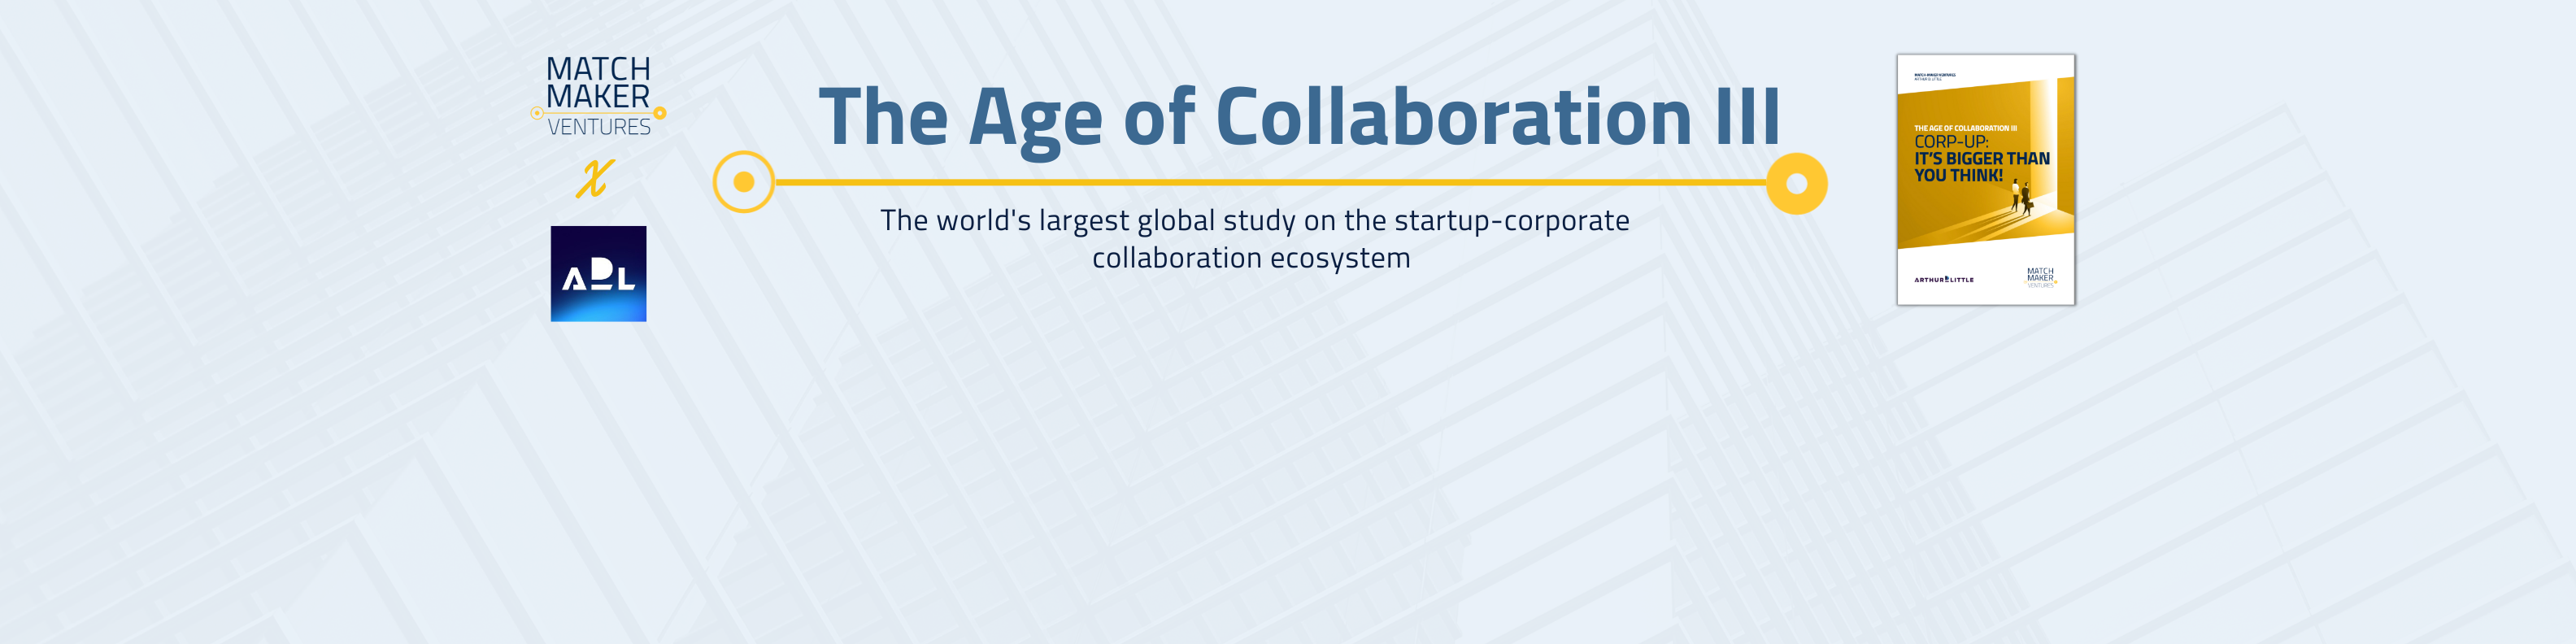 The Age of Collaboration III from Match-Maker Ventures and Arthur D. Little